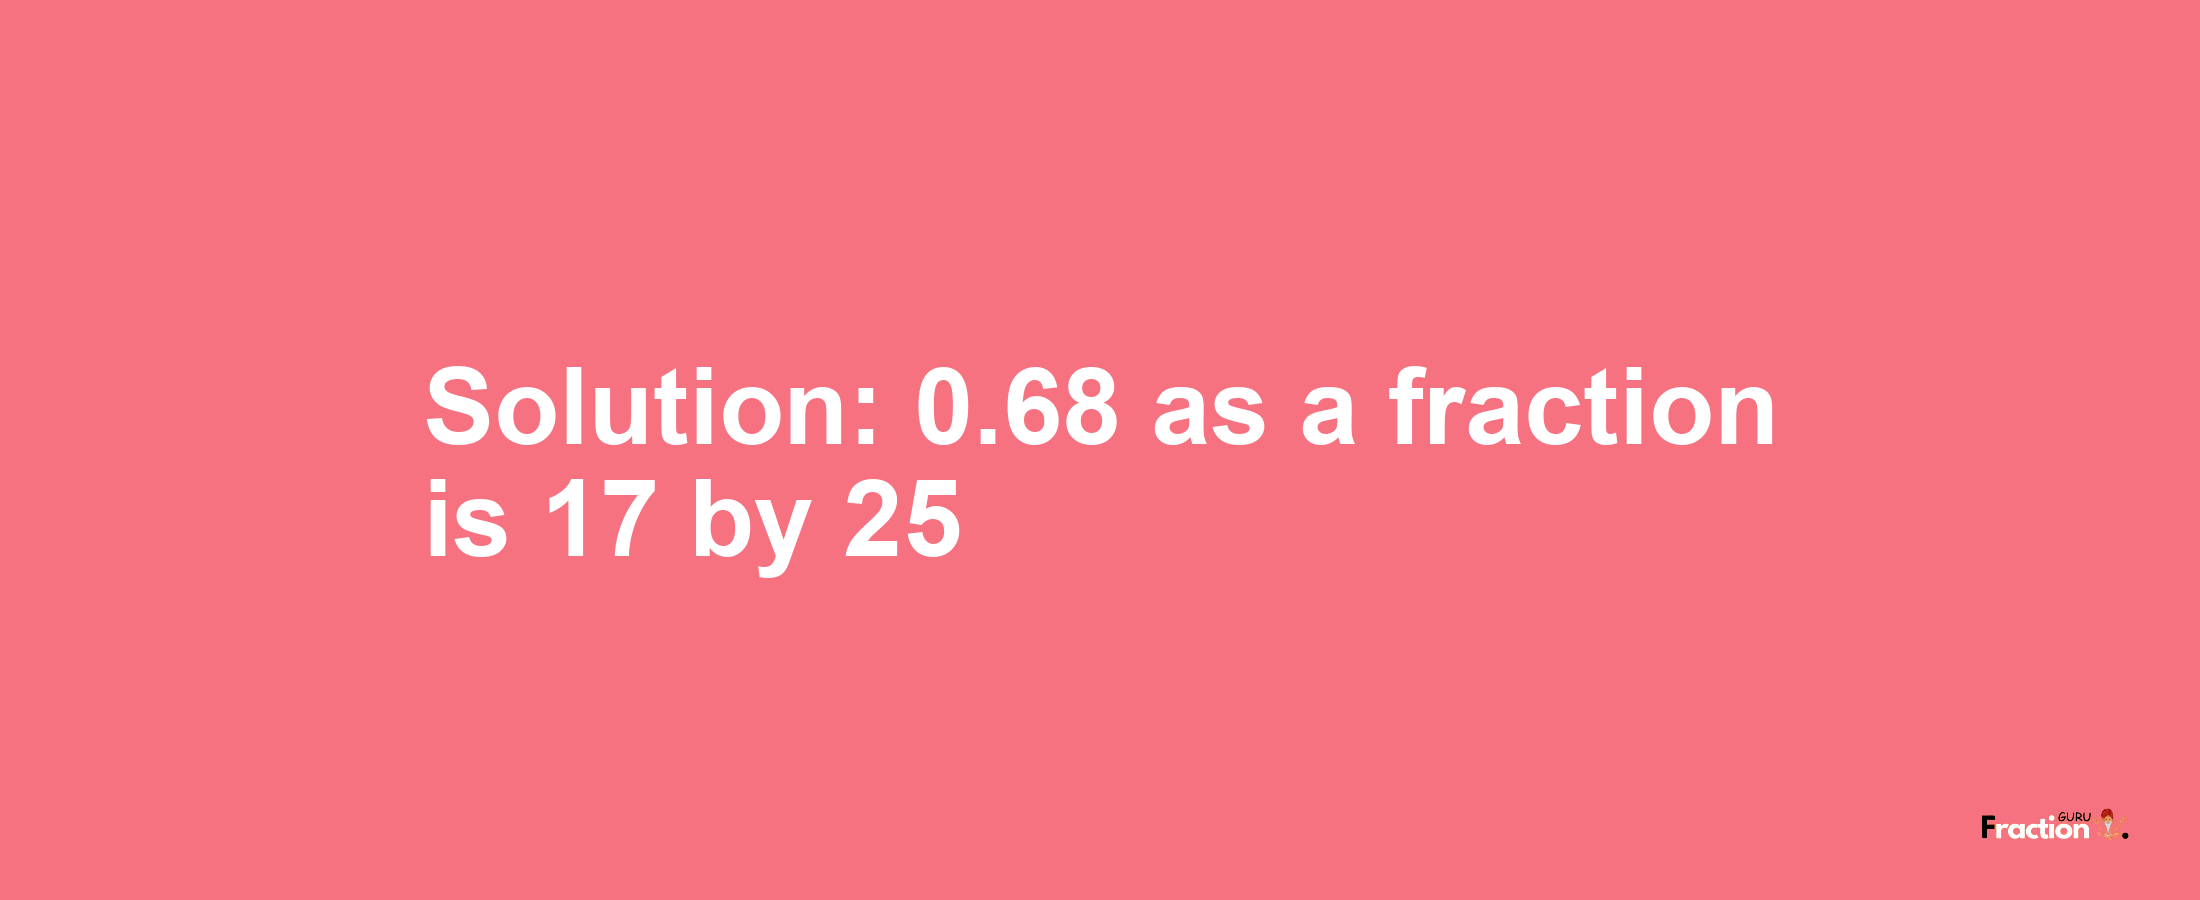 Solution:0.68 as a fraction is 17/25